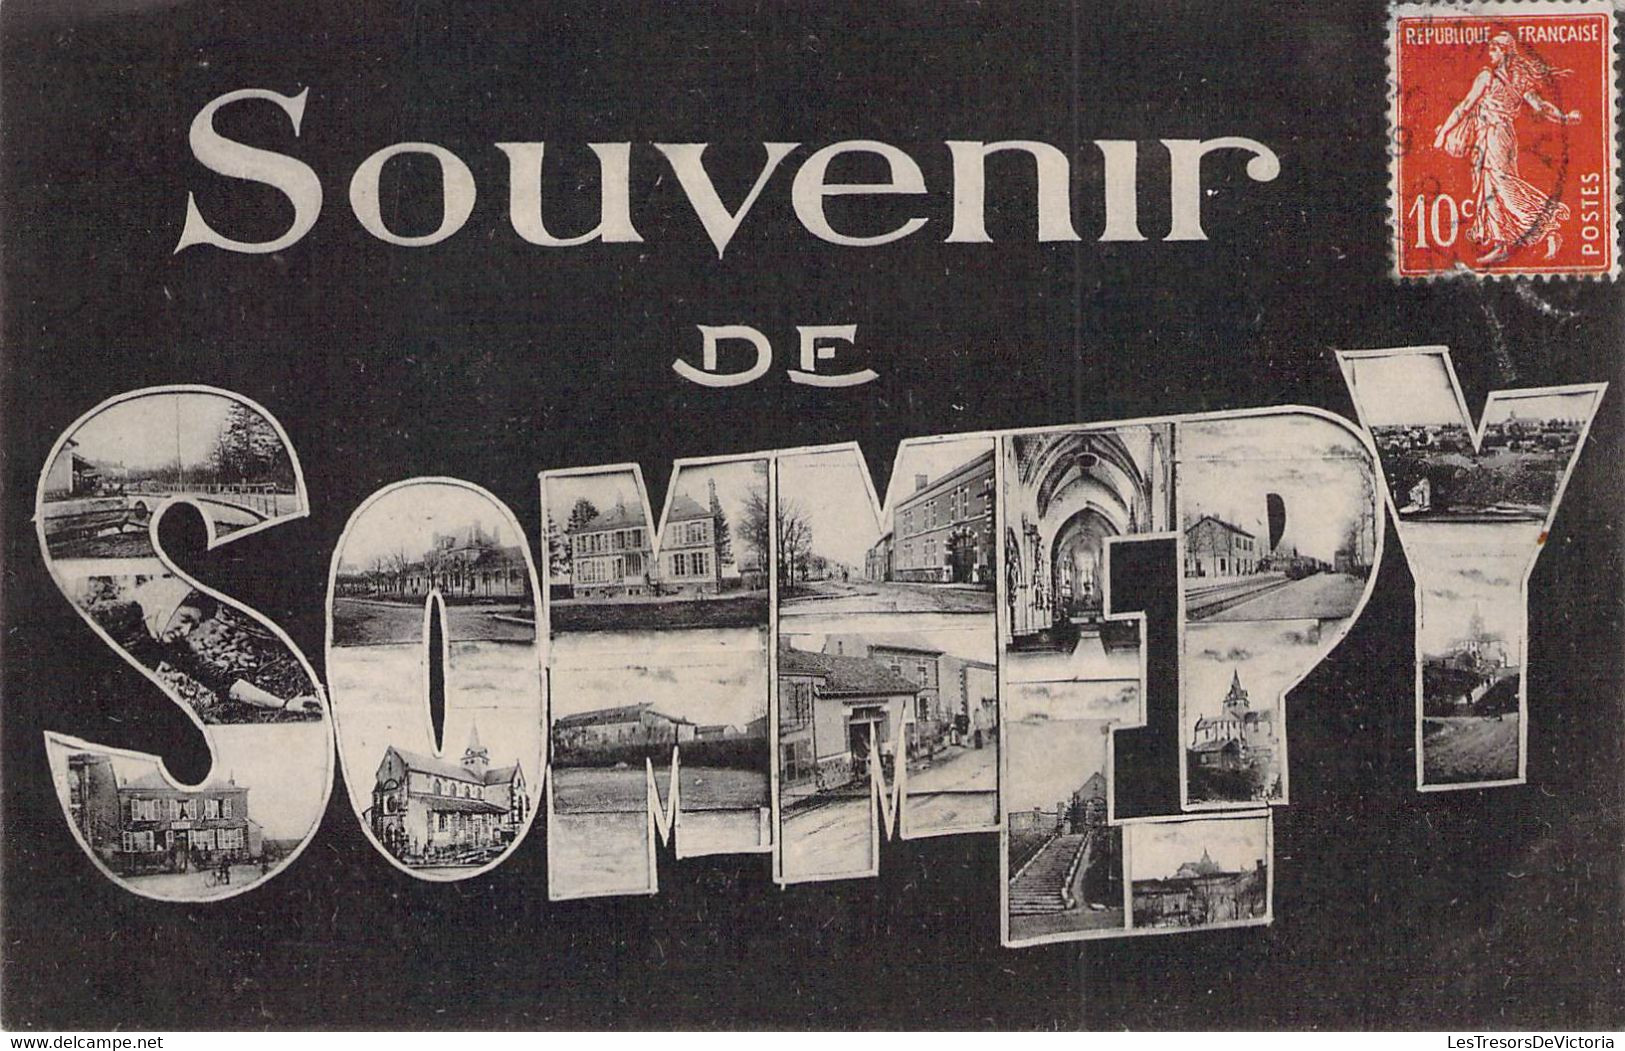 CPA SOUVENIRS DE - SOMMEPY 1909 - Greetings From...